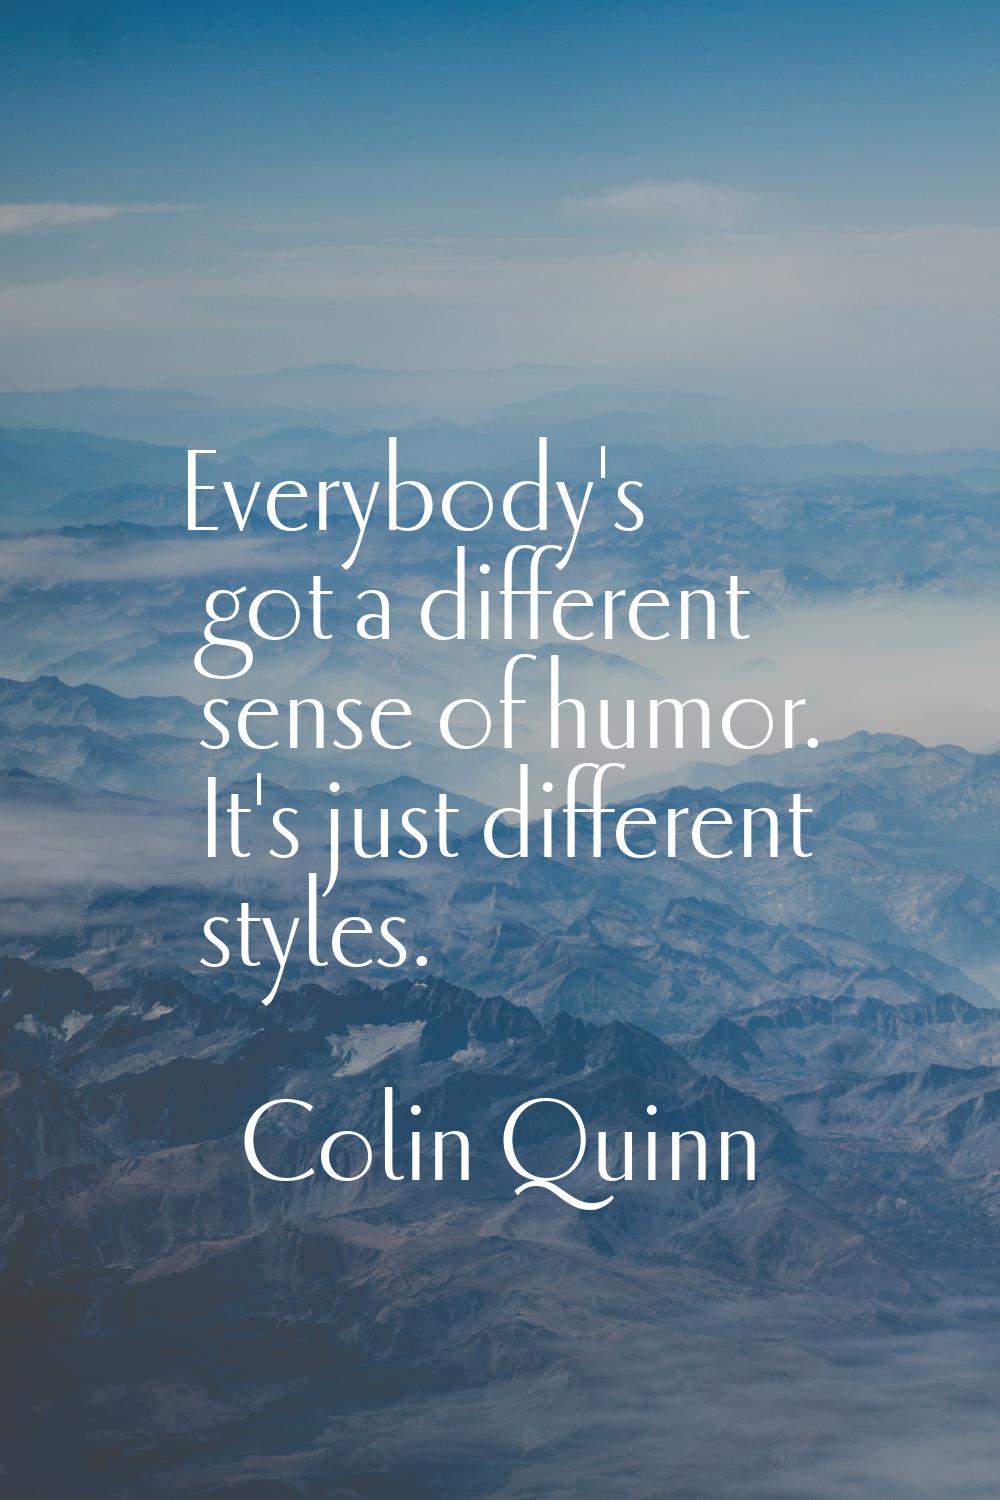 Everybody's got a different sense of humor. It's just different styles.